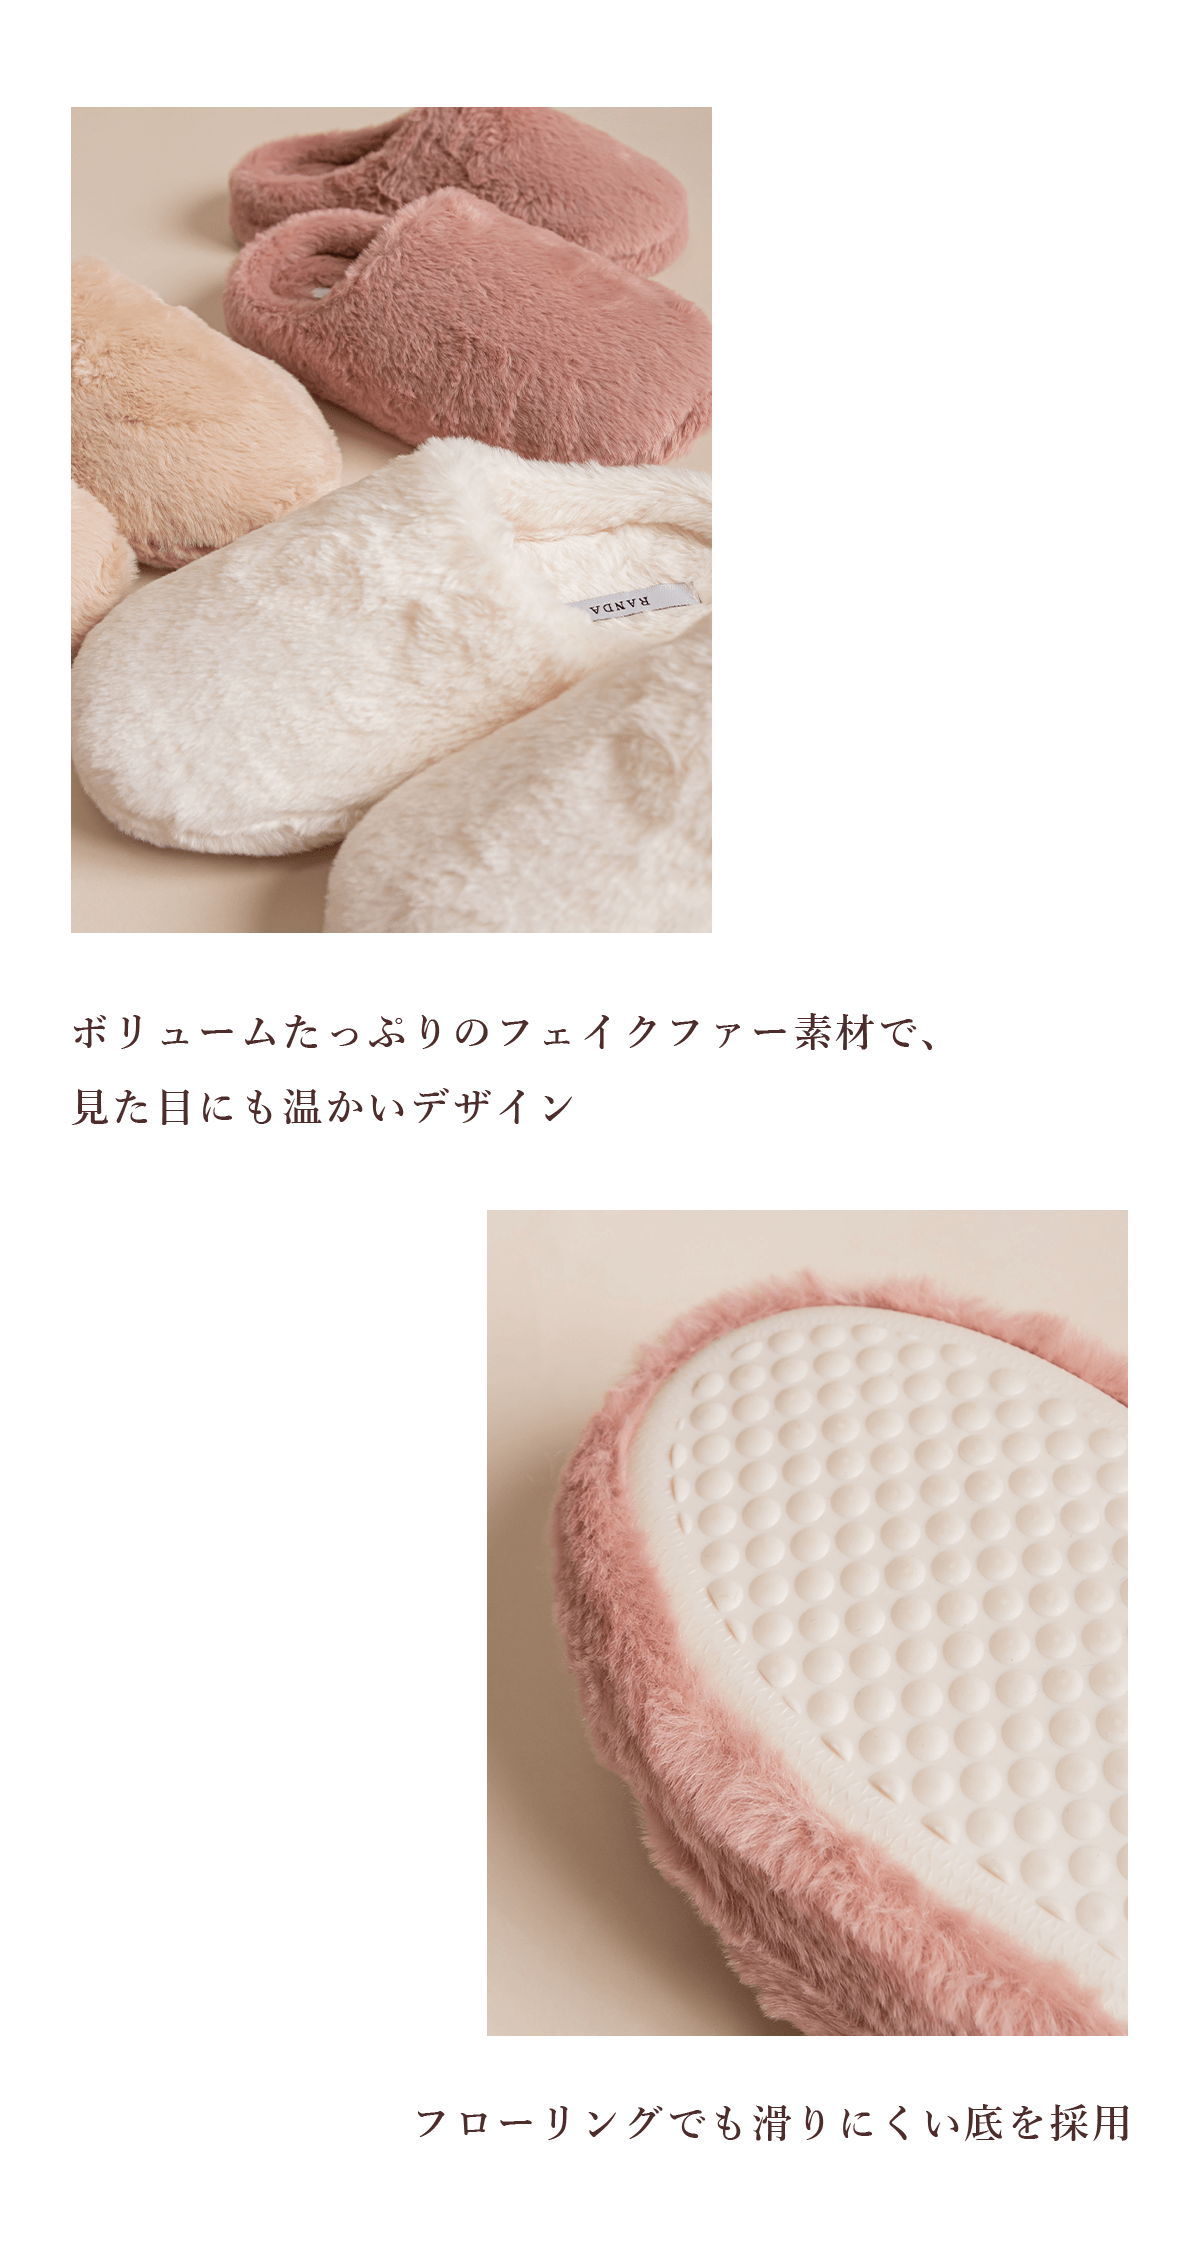 SP用の画像